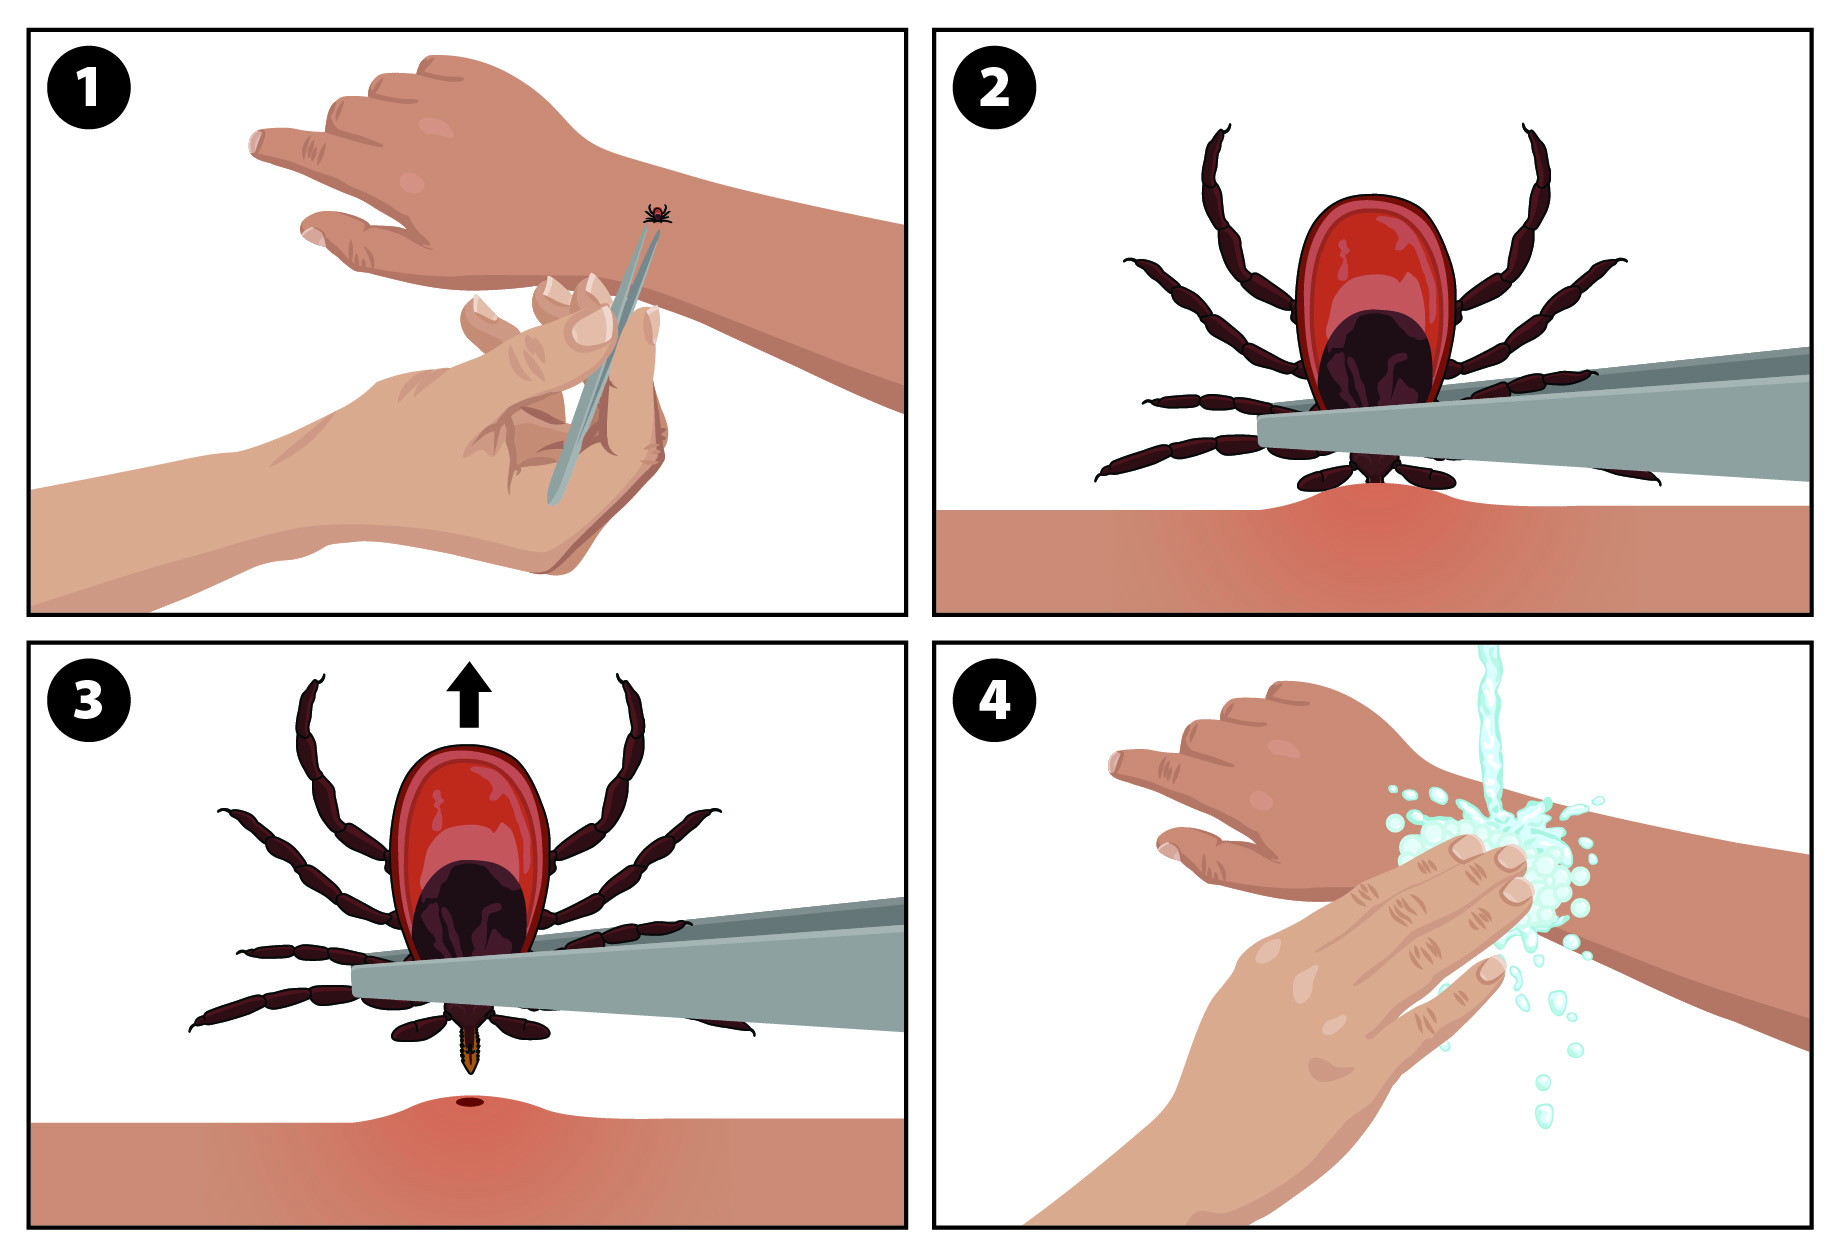 Four-step graphic showing how to remove a tick